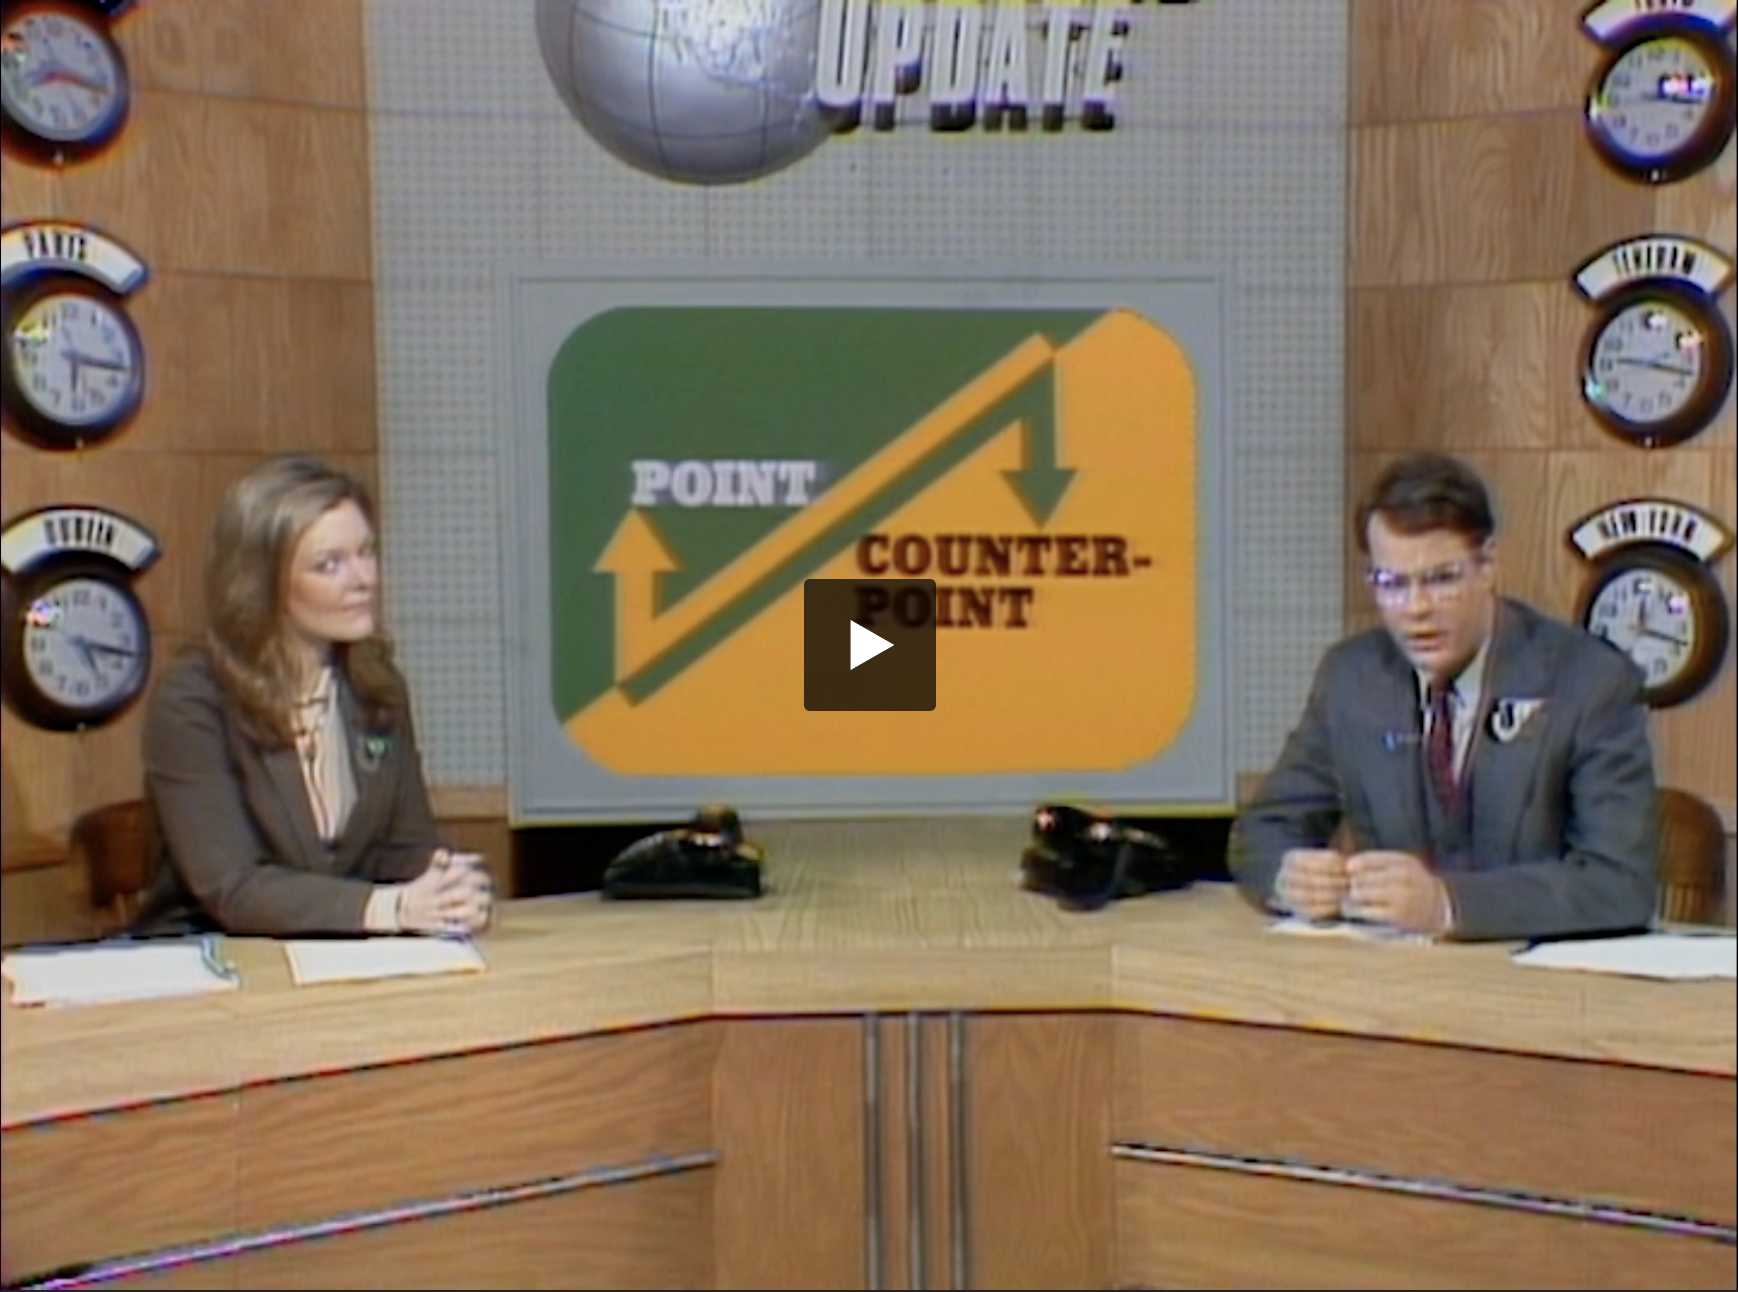 Jane Curtain and Dan Aykroyd in Point Counterpoint